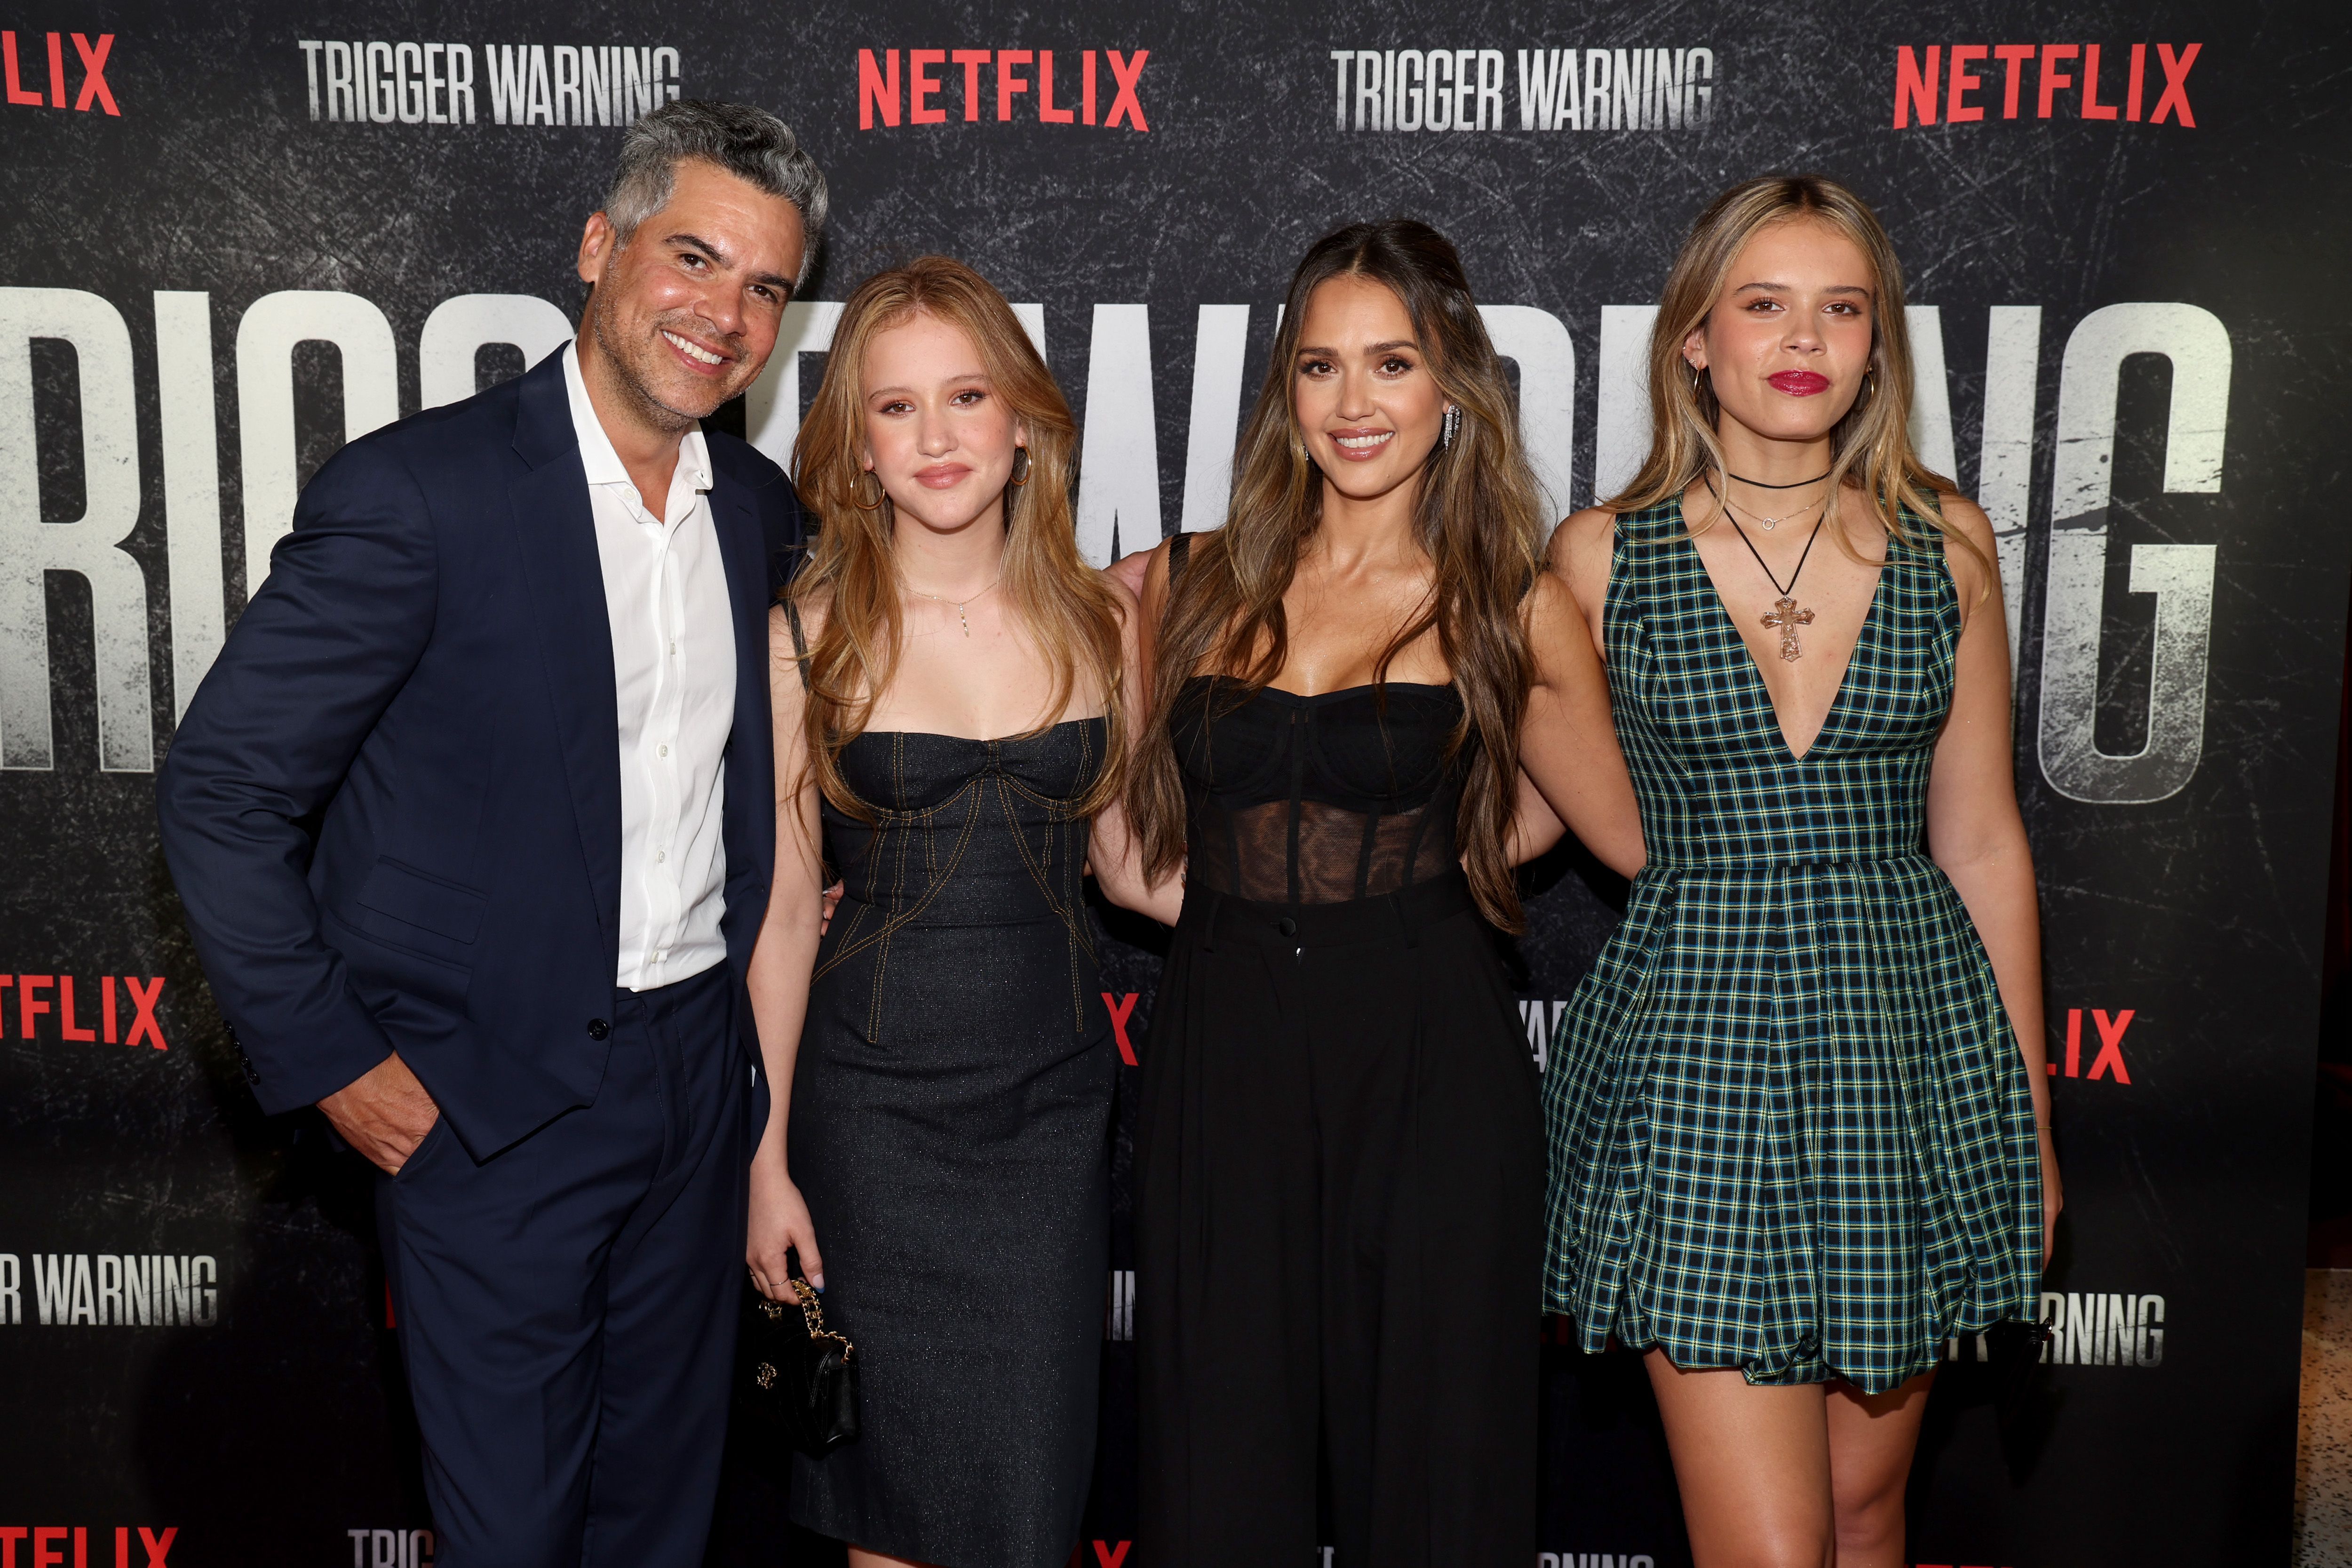 Jessica Alba with her husband Cash Warren and daughters Haven Garner and Honor Marie Warren at a screening of the Netflix Film Trigger Warning